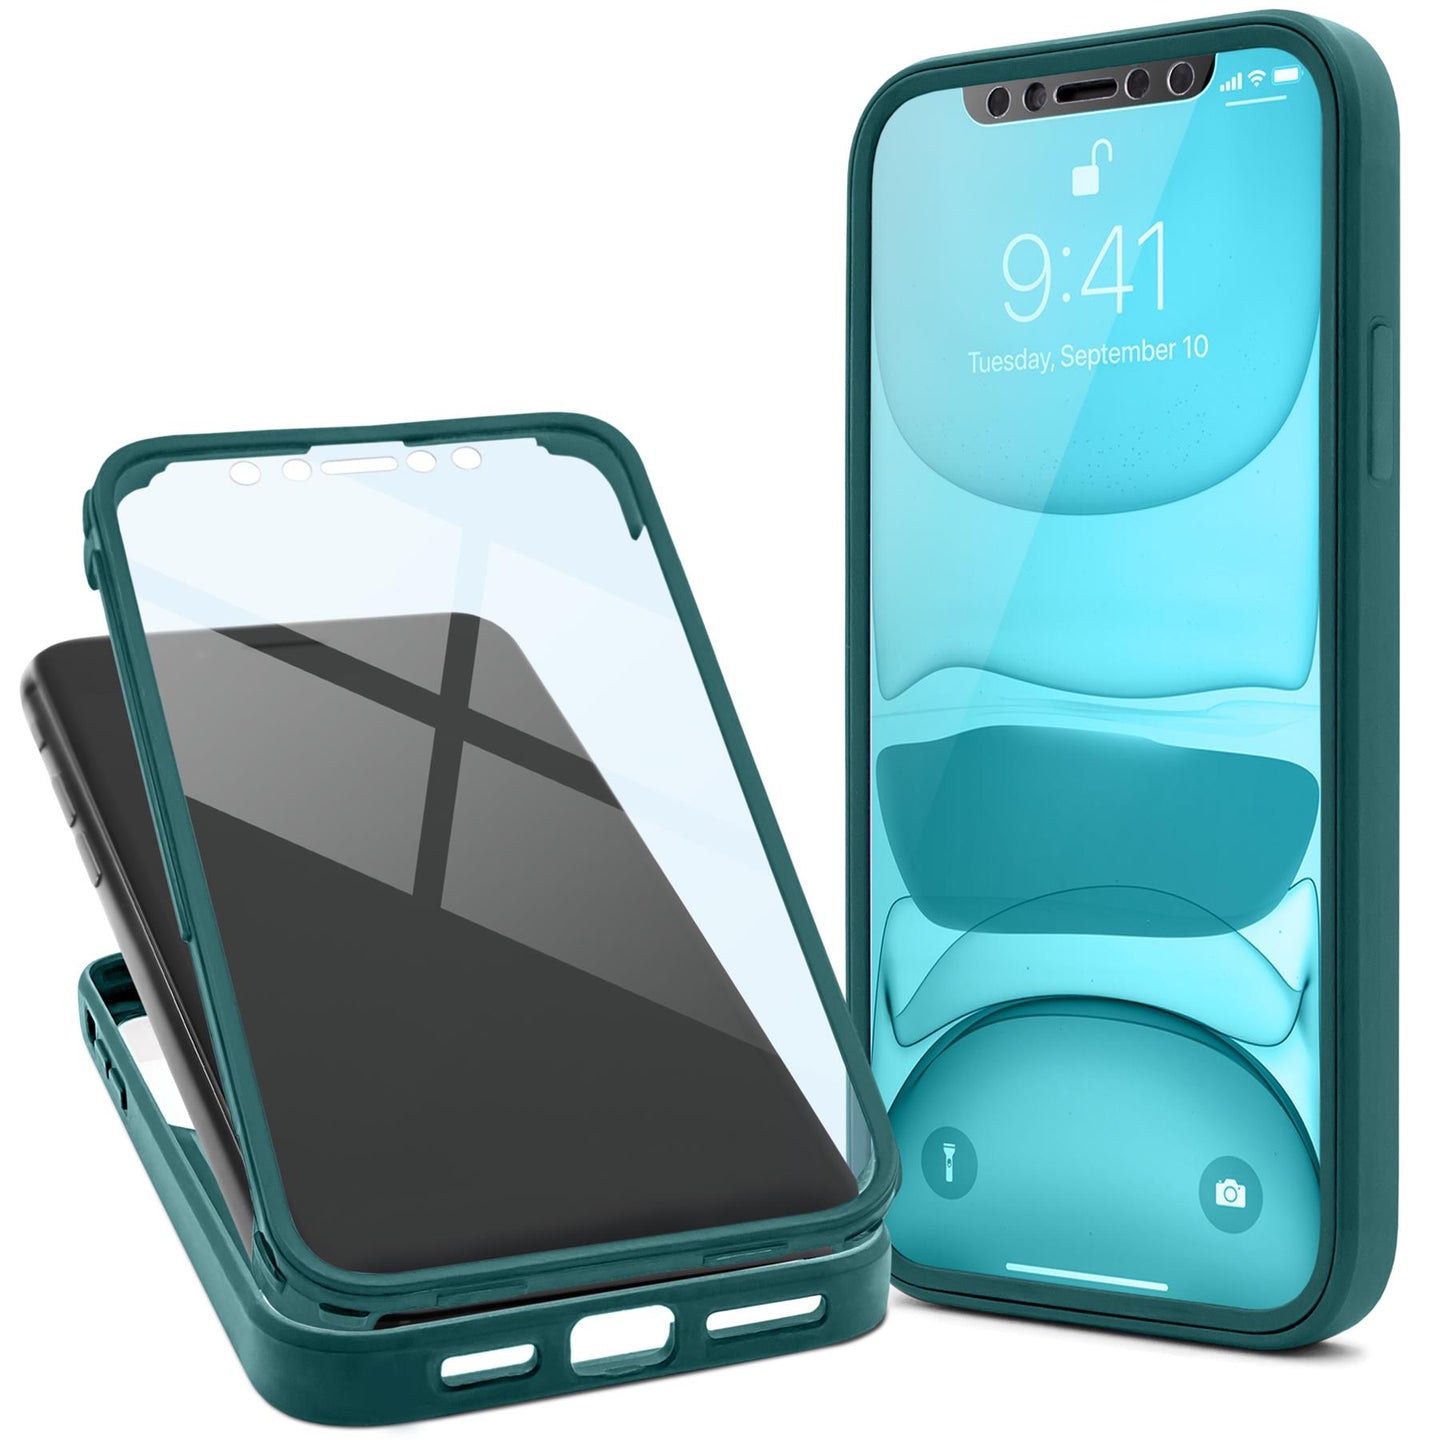 Moozy 360 Case for iPhone 12 / 12 Pro - Green Rim Transparent Case, Full Body Double-sided Protection, Cover with Built-in Screen Protector